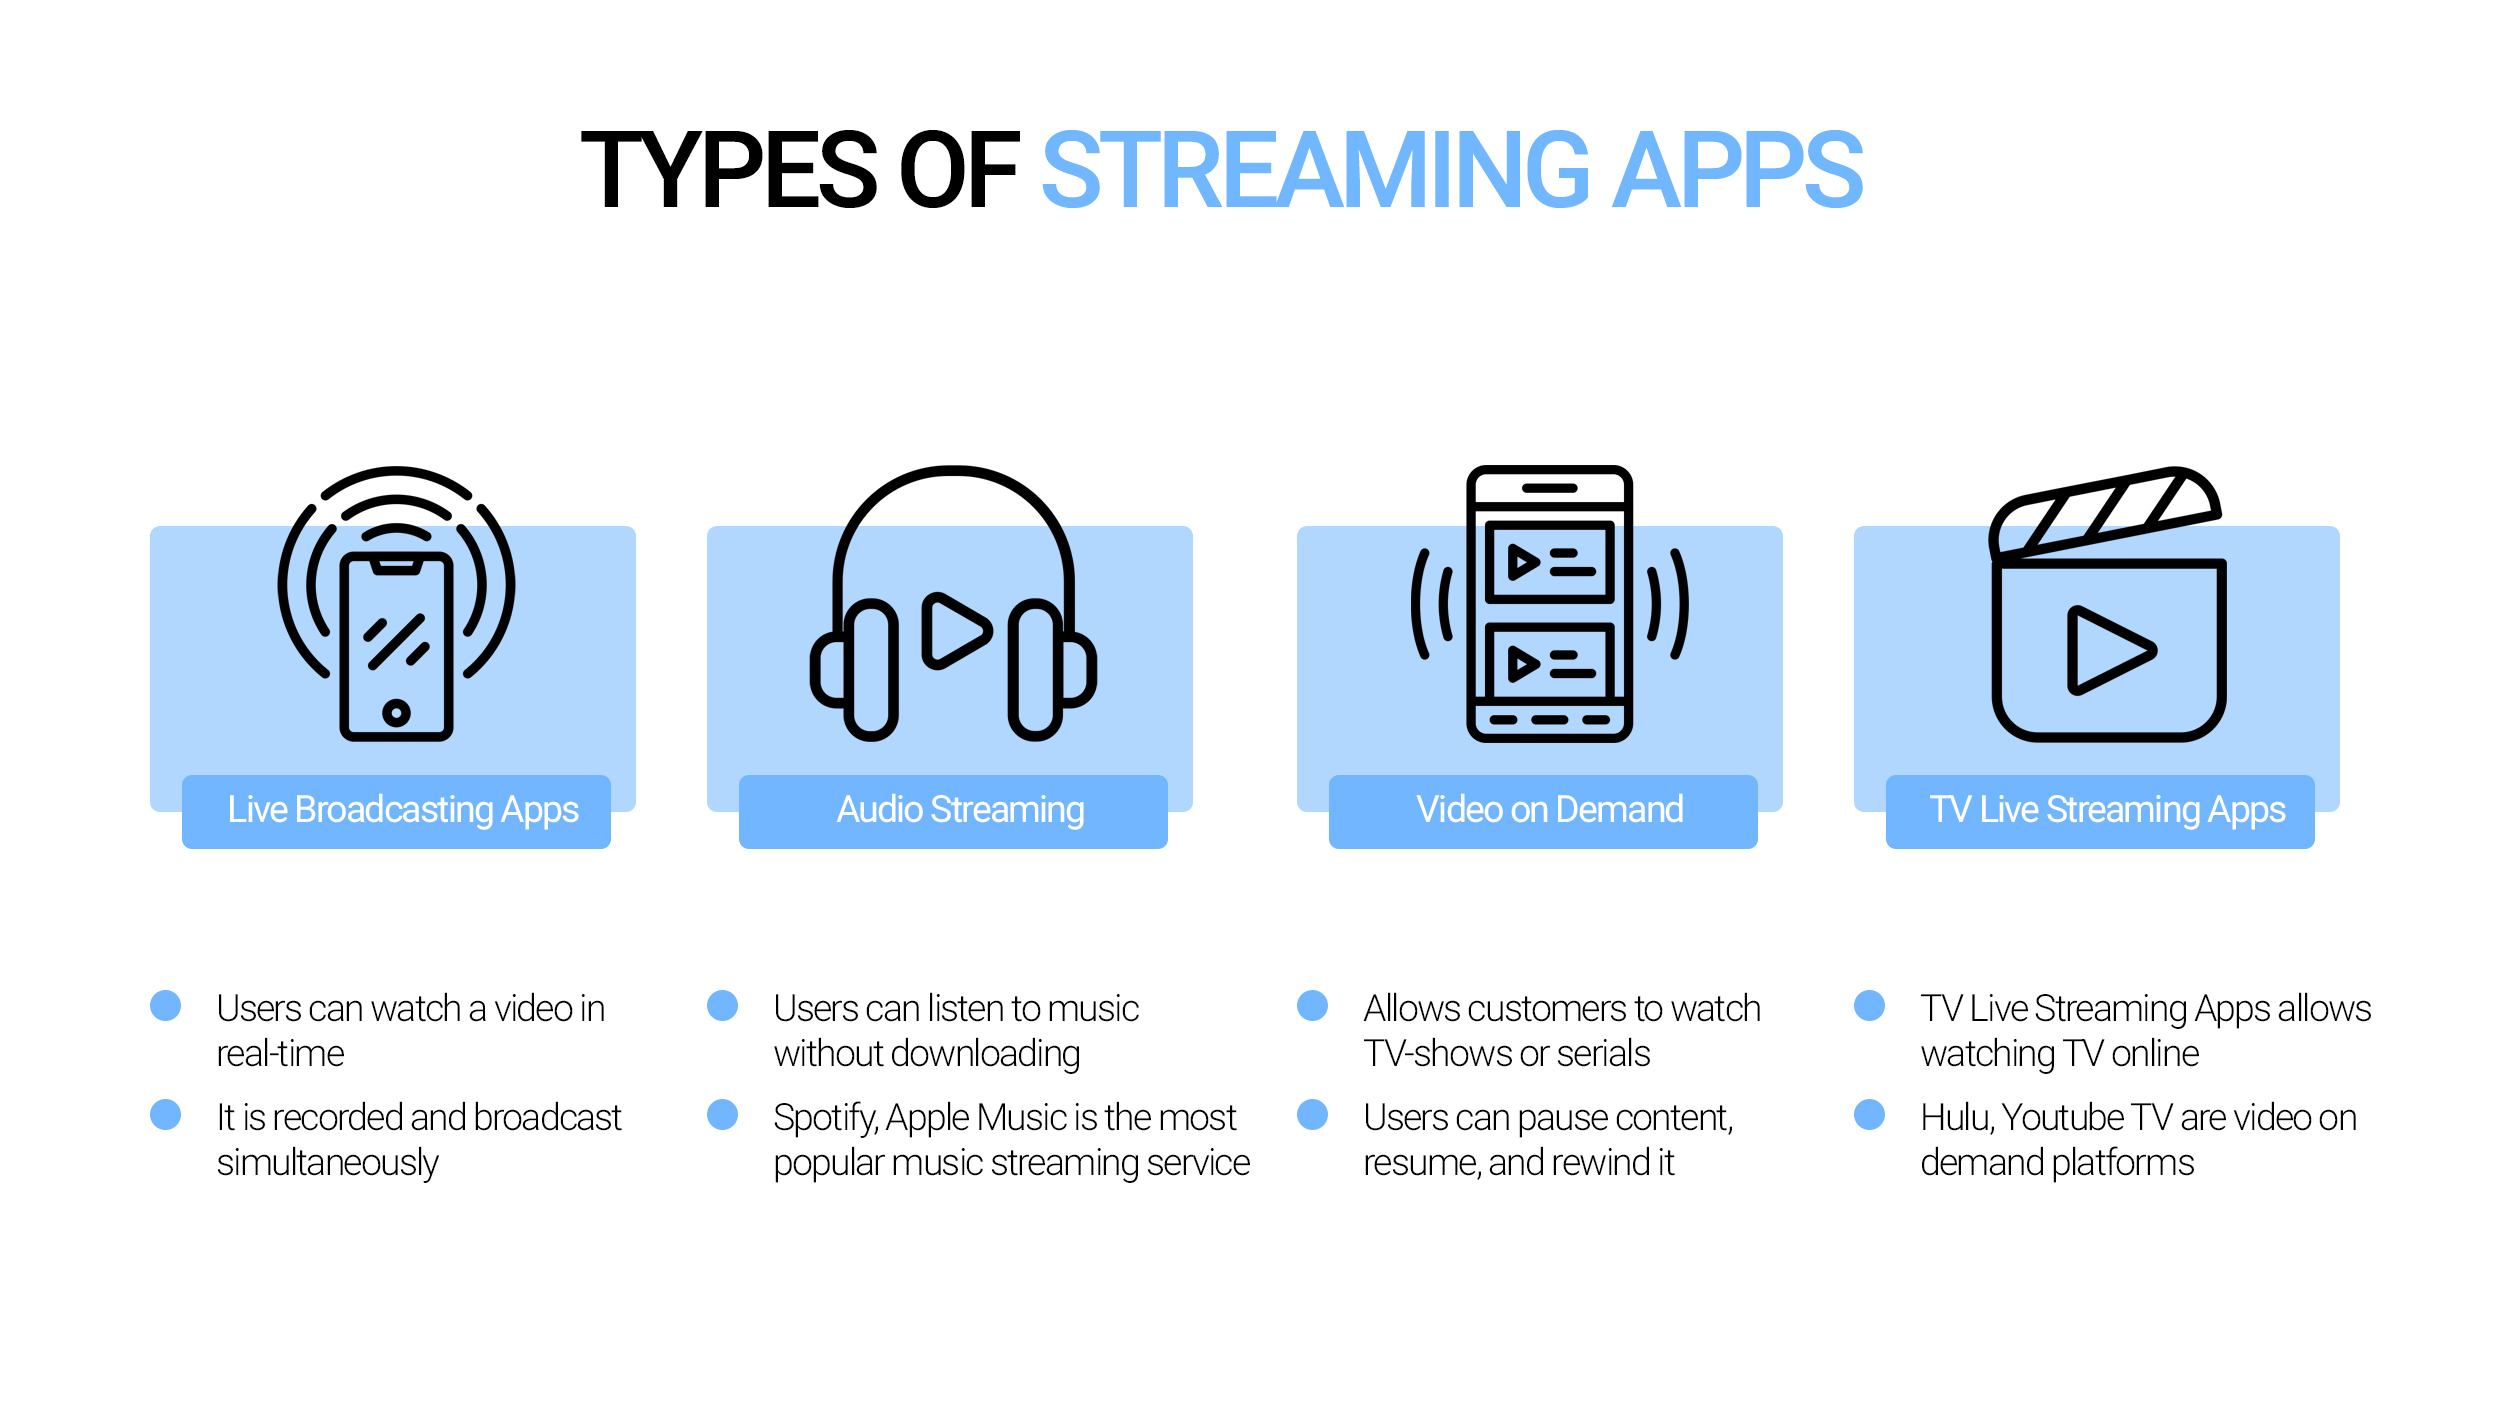 Types of live video streaming apps